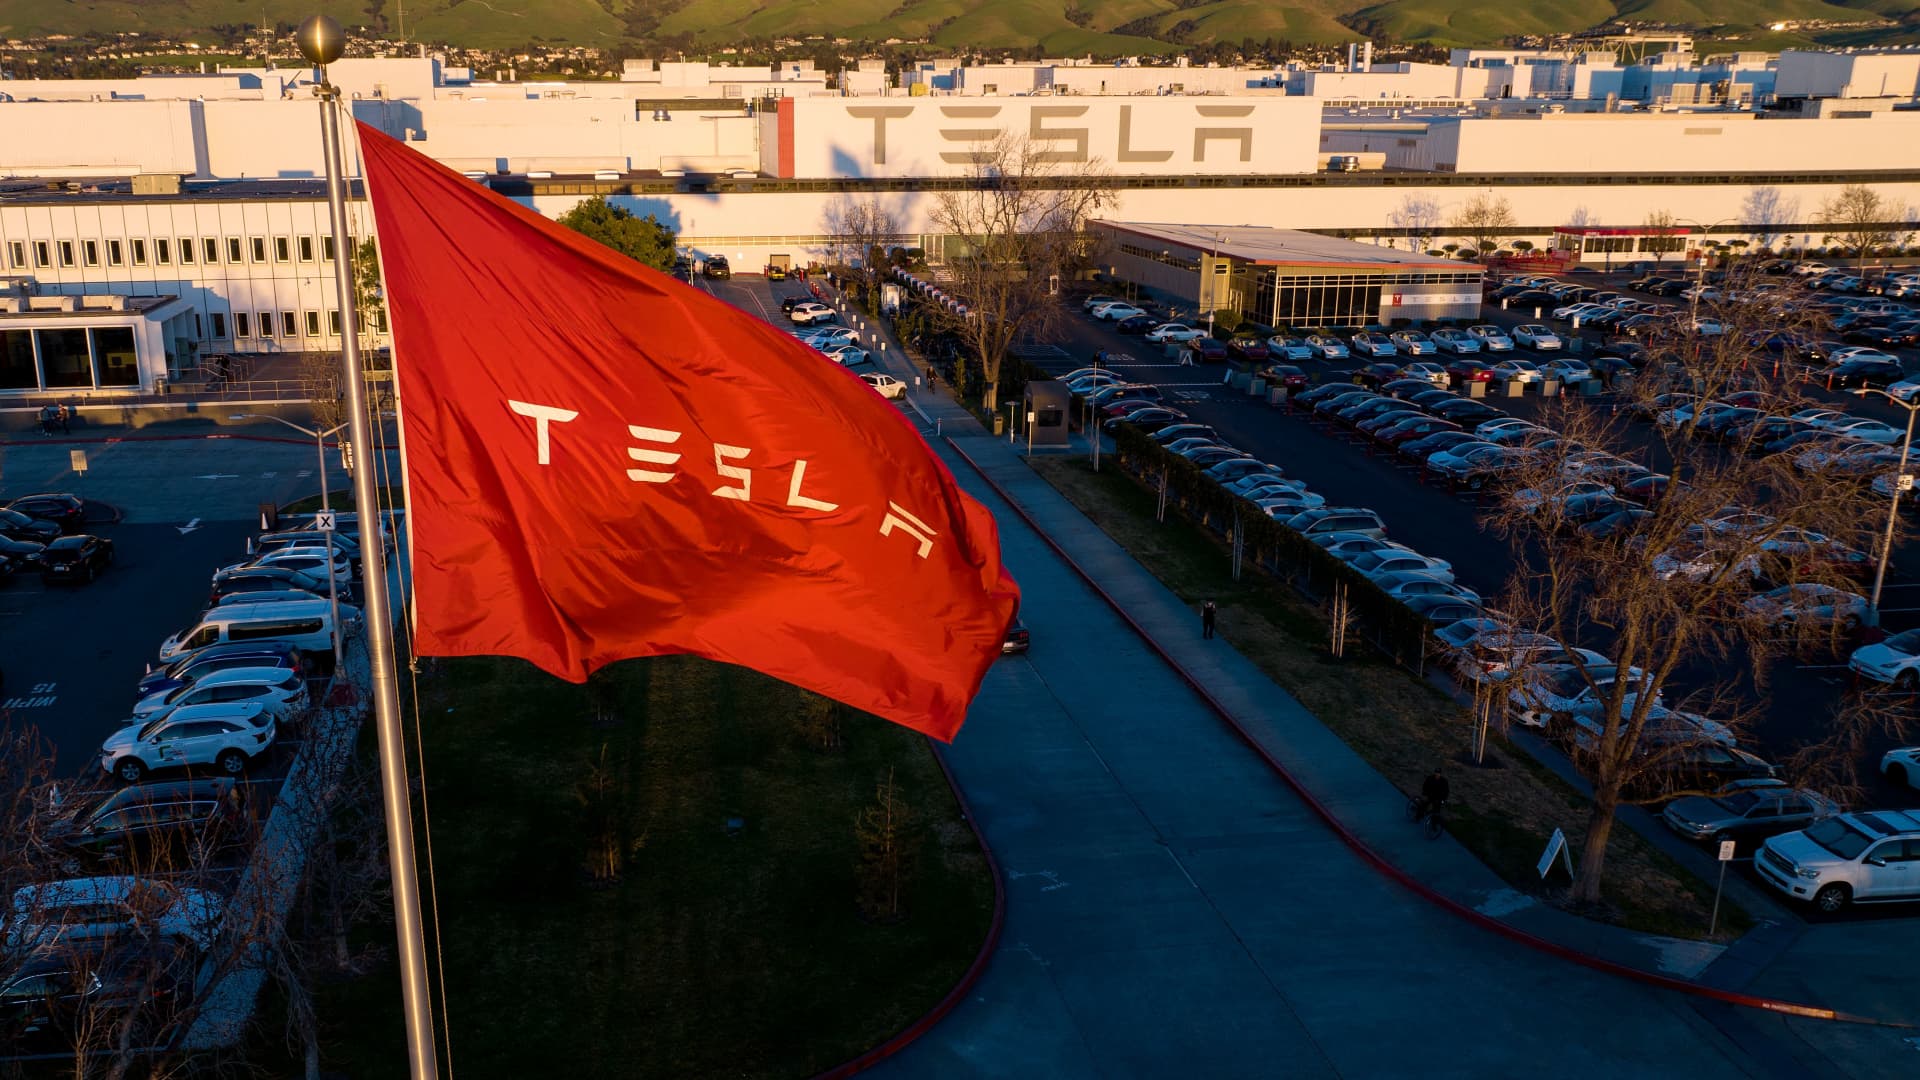 Tesla ban on pro-union shirts violated workers’ rights, labor board rules